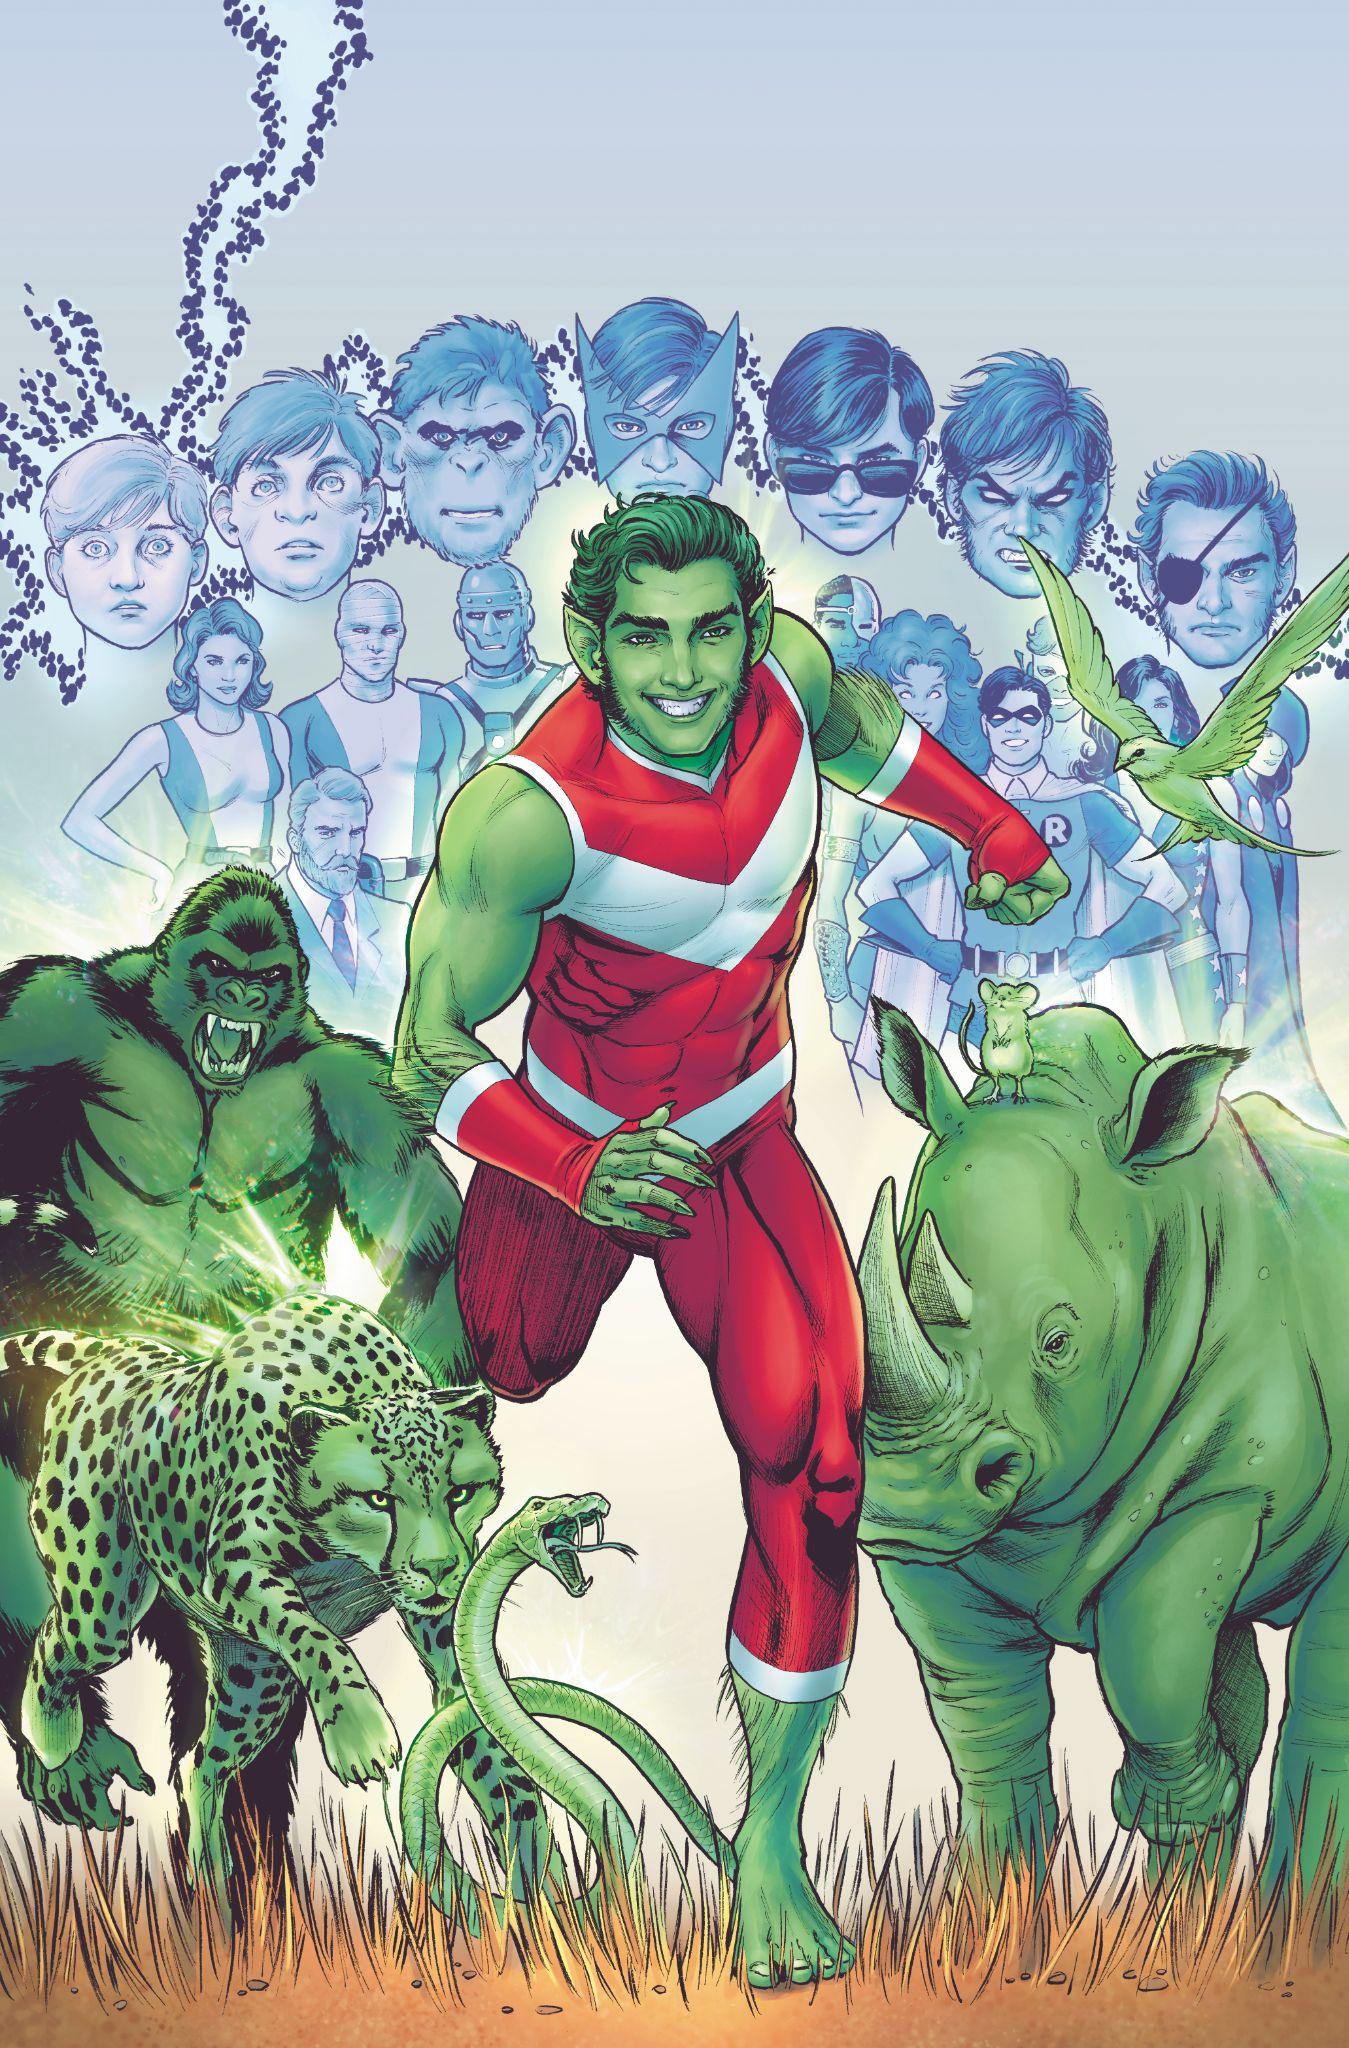 Beast Boy runs towards the viewer, images of his teammates and villains behind him, an images of green animals around him on the cover of Tales of the Titans #4. 